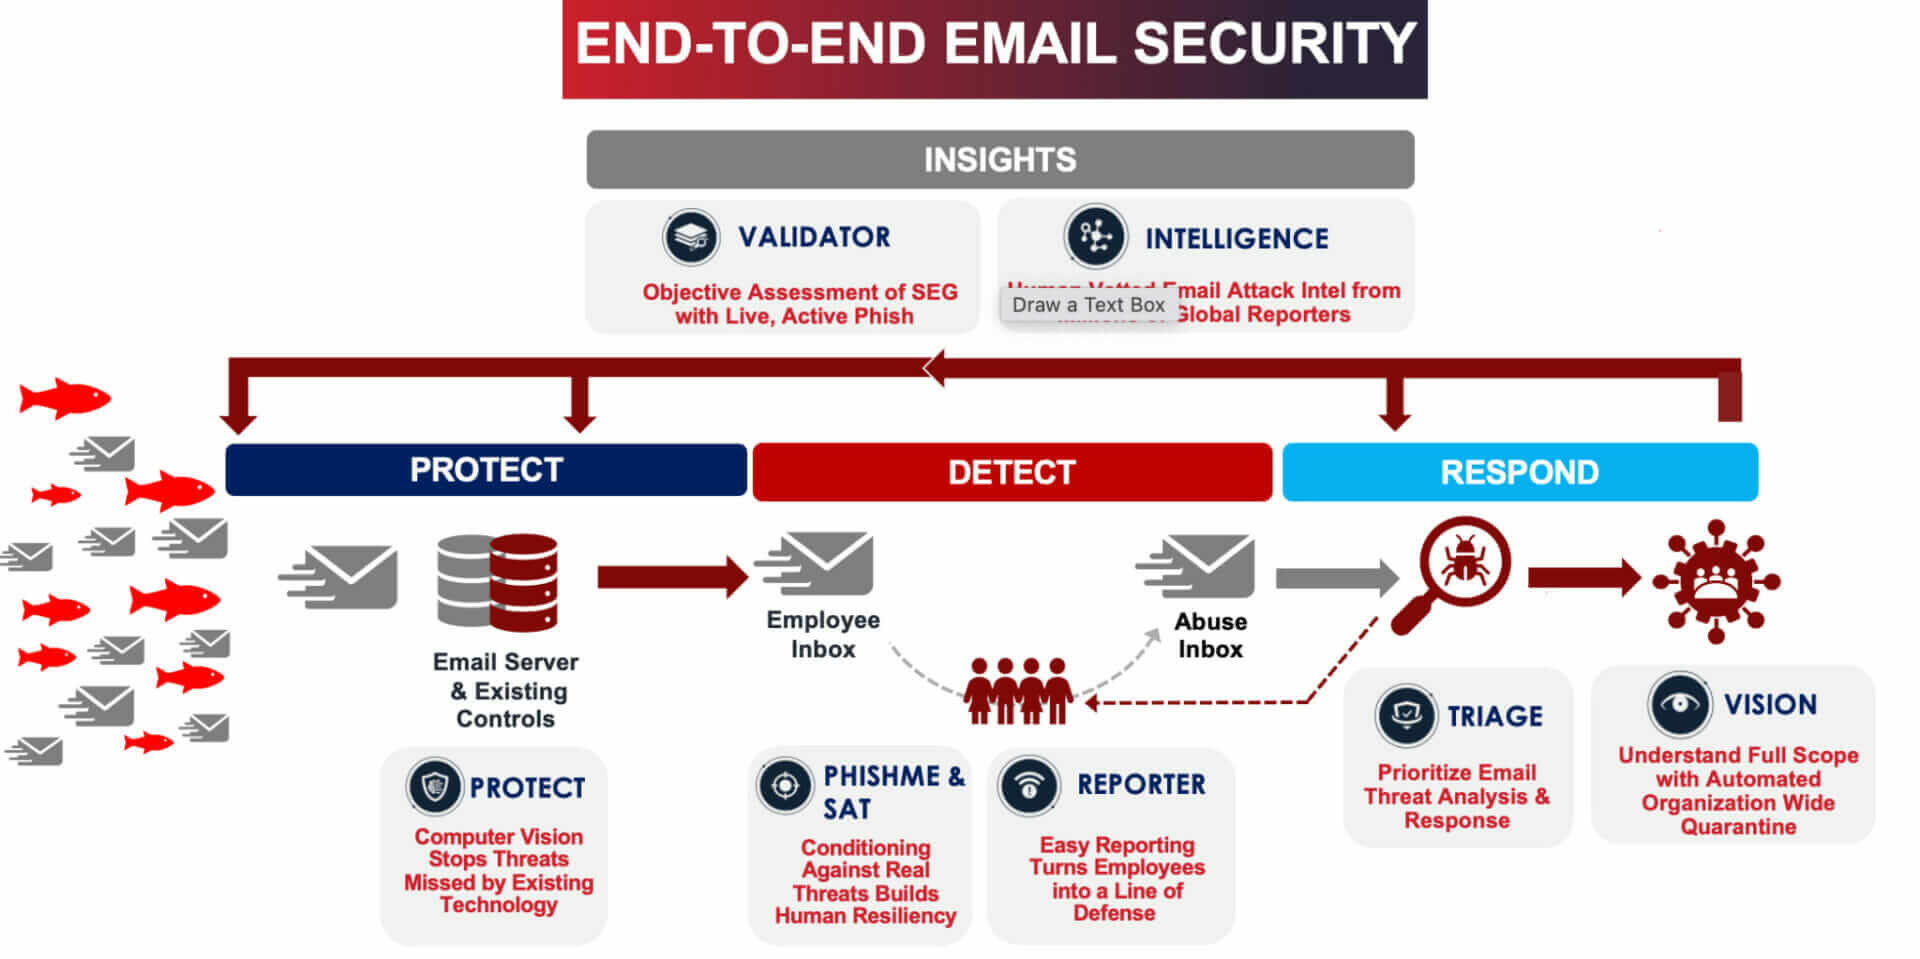 Illustration of end-to-end email security solutions for enterprise-level threat prevention